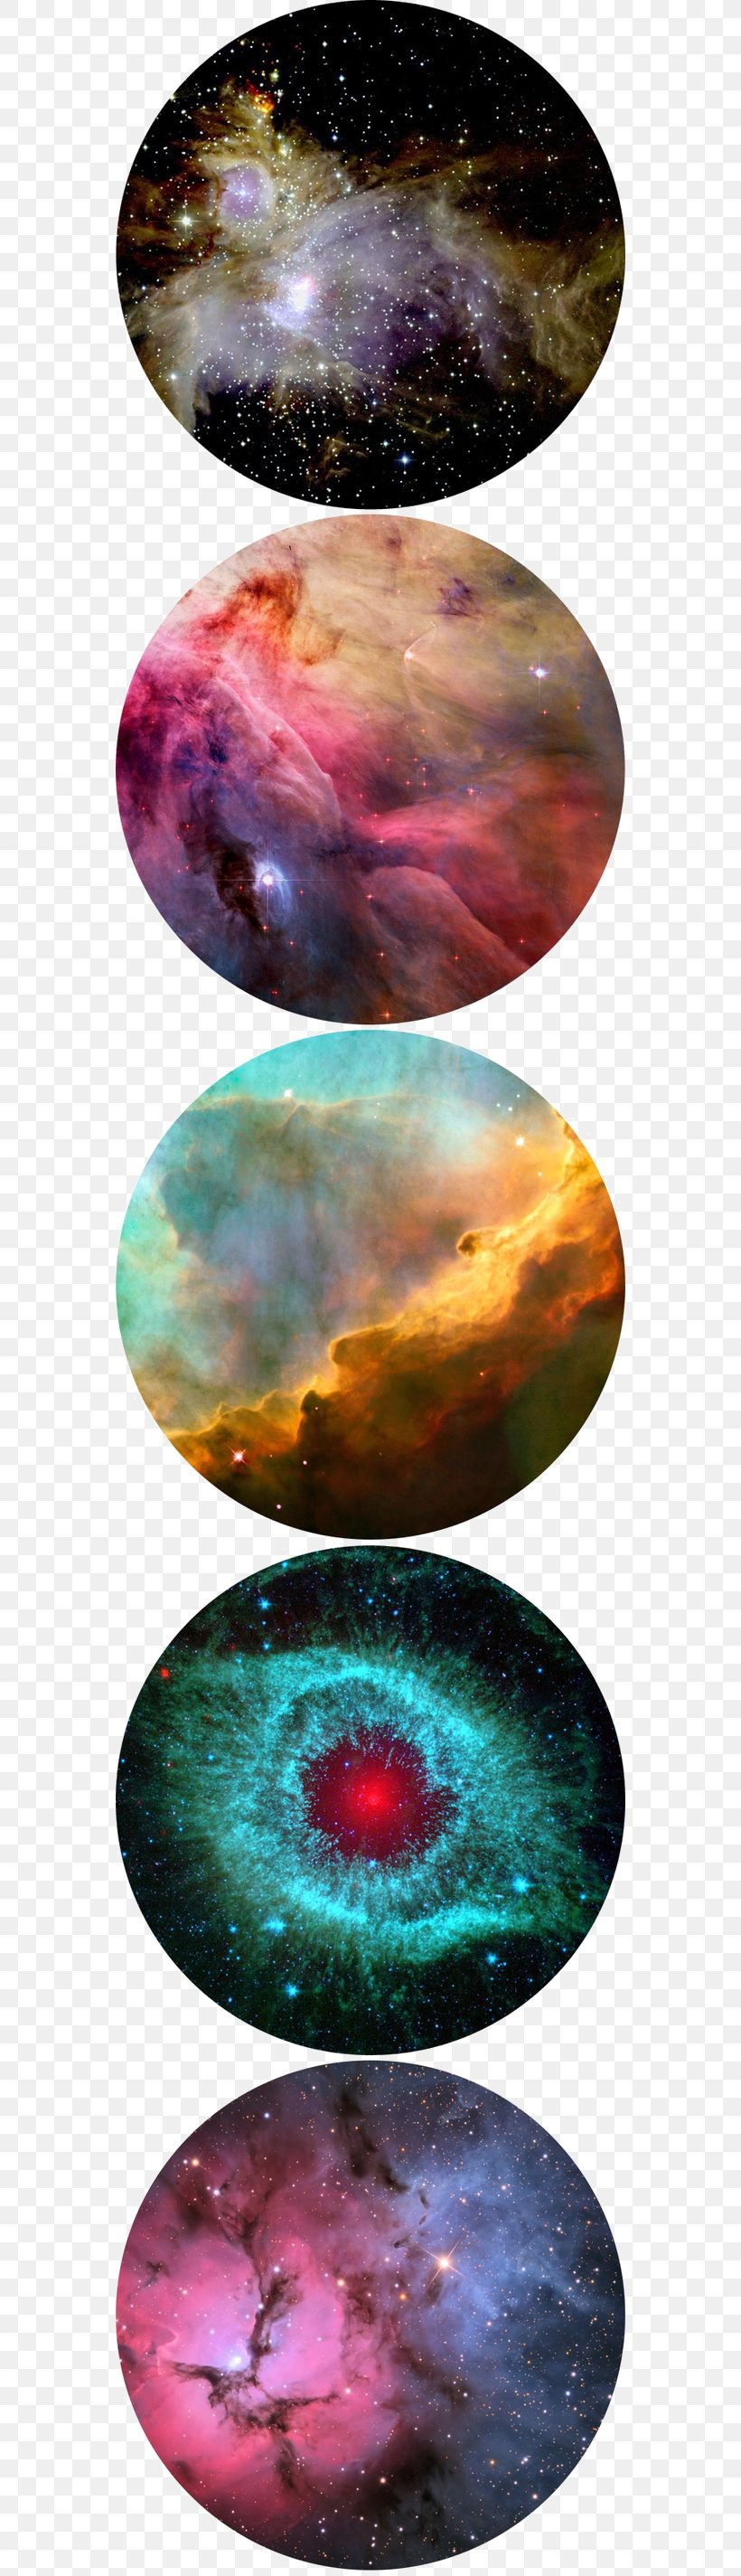 Necklace Jewellery Pendant Chain Sky, PNG, 564x2849px, Nebula, Astronomy, Close Up, Cosmos, Galaxy Download Free